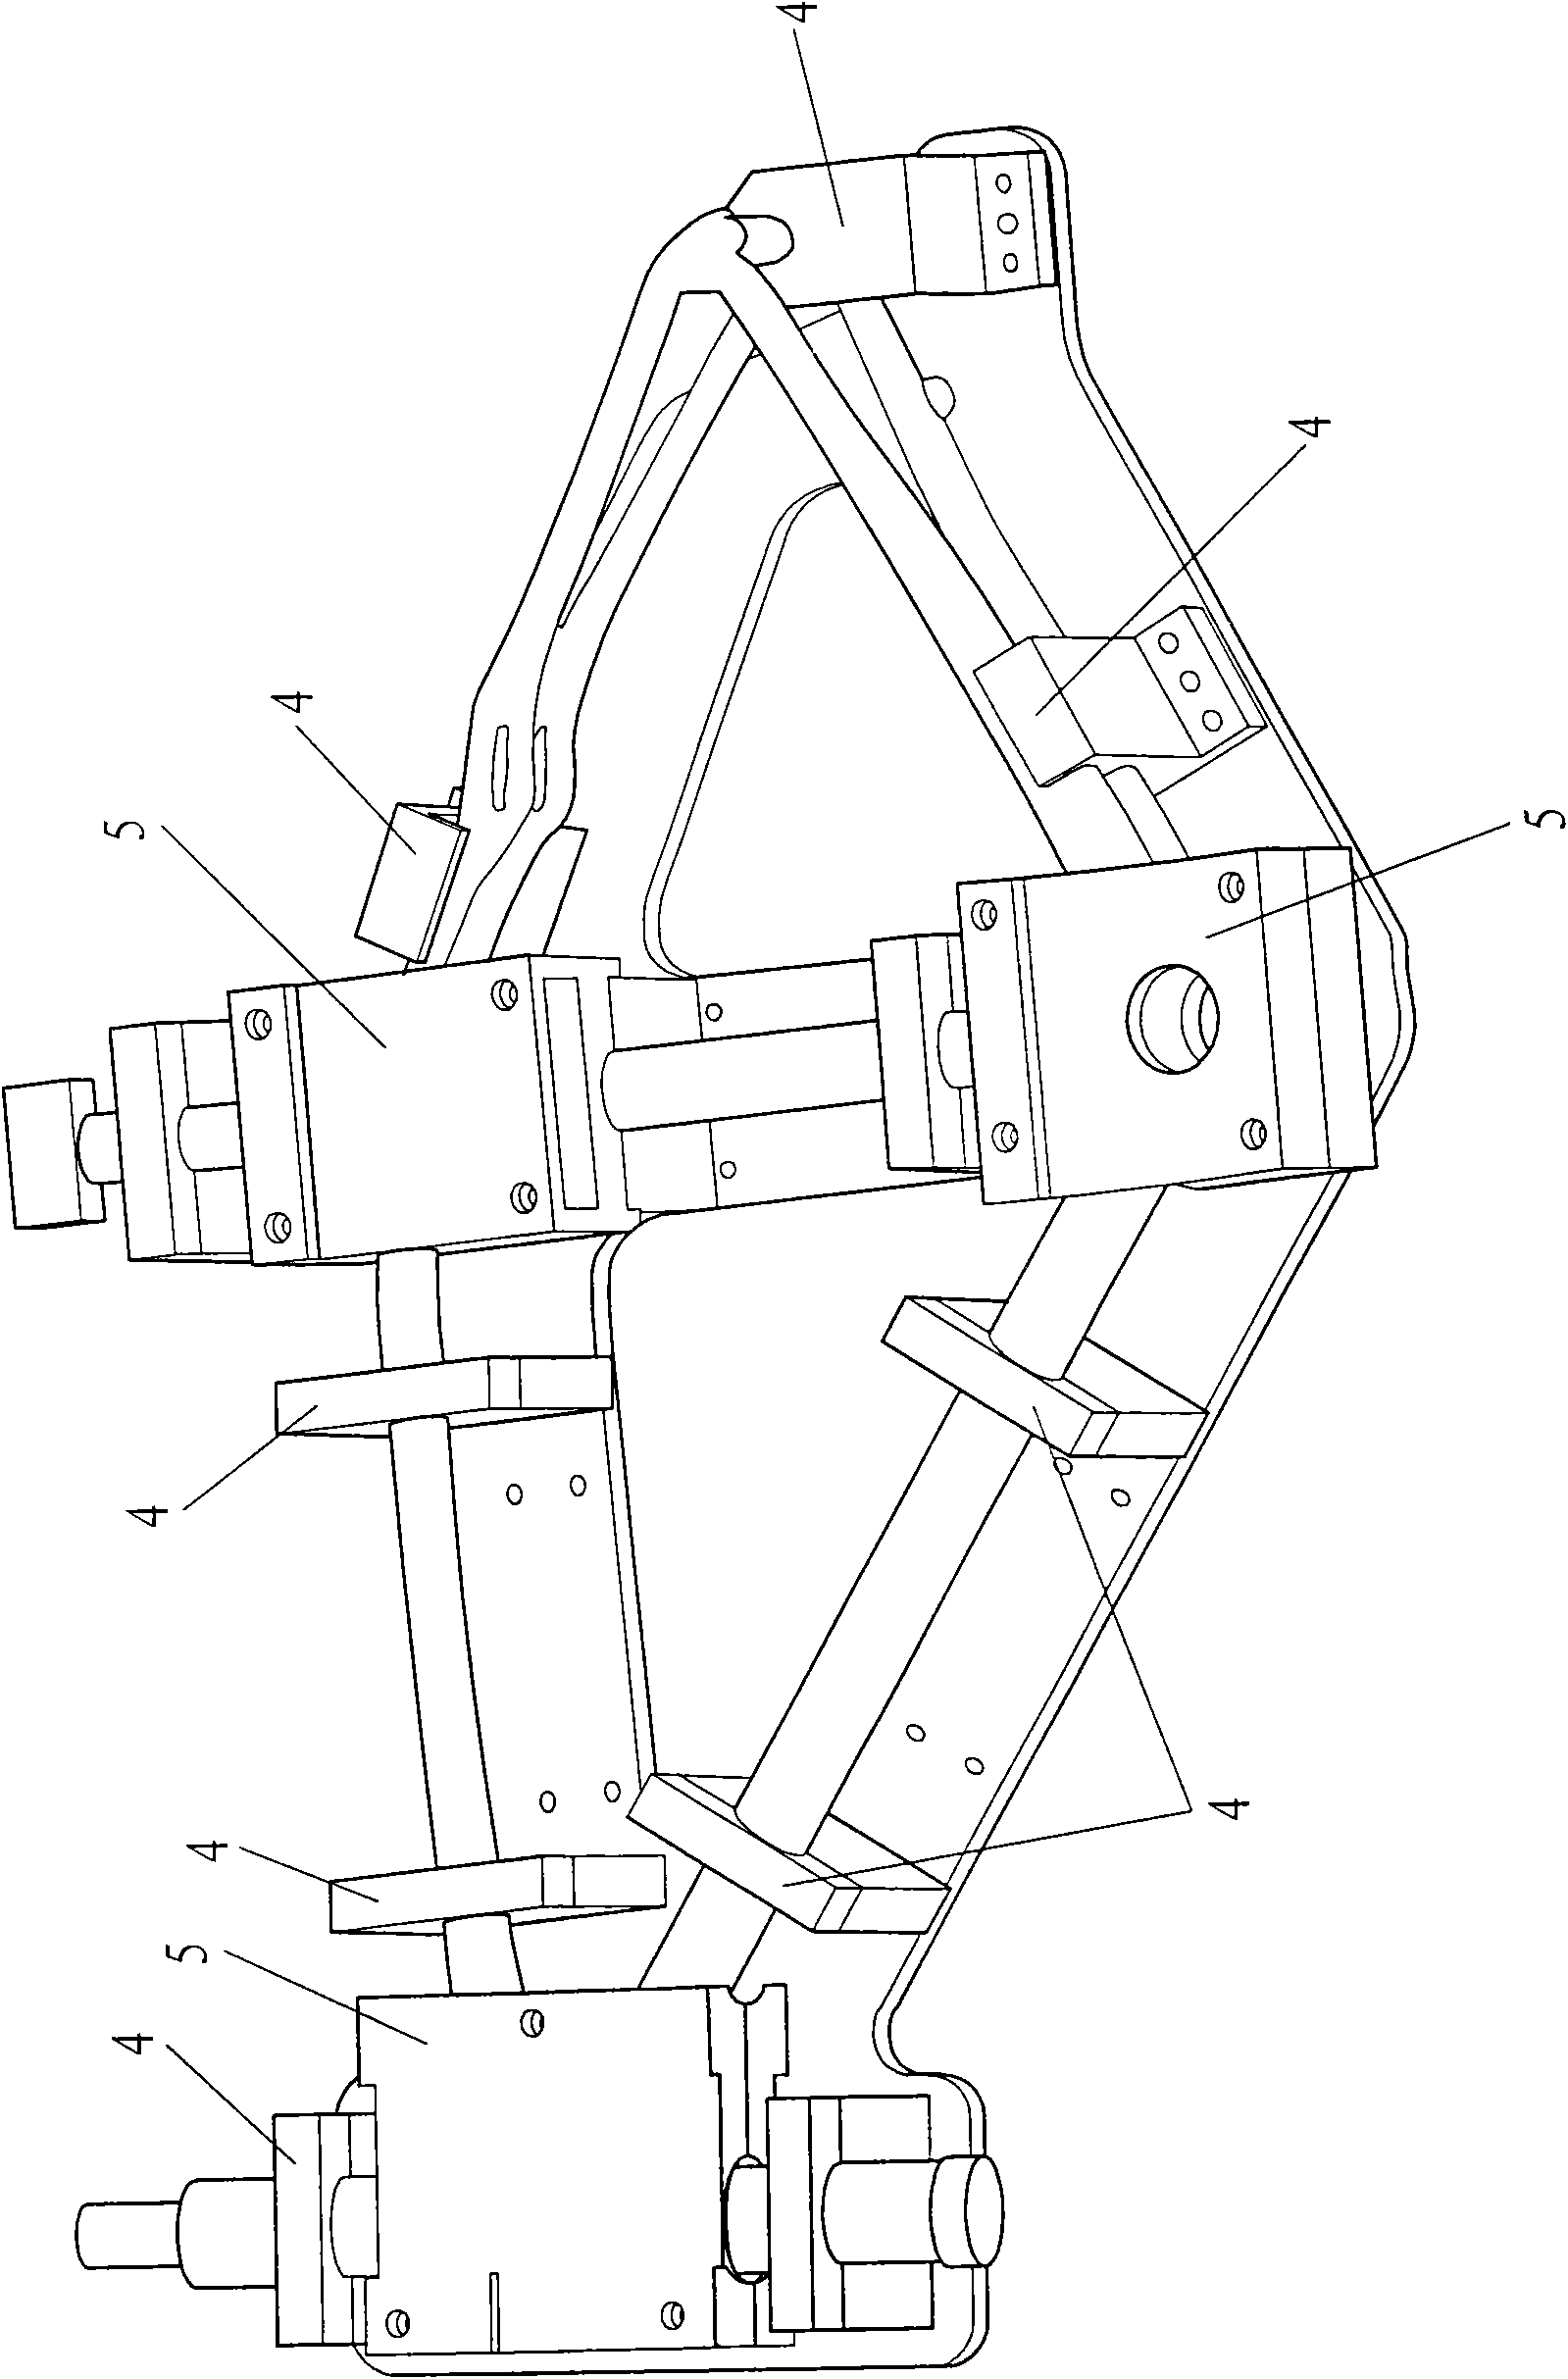 Manufacture method for jointing and reinforcing pipe fitting made from composite materials